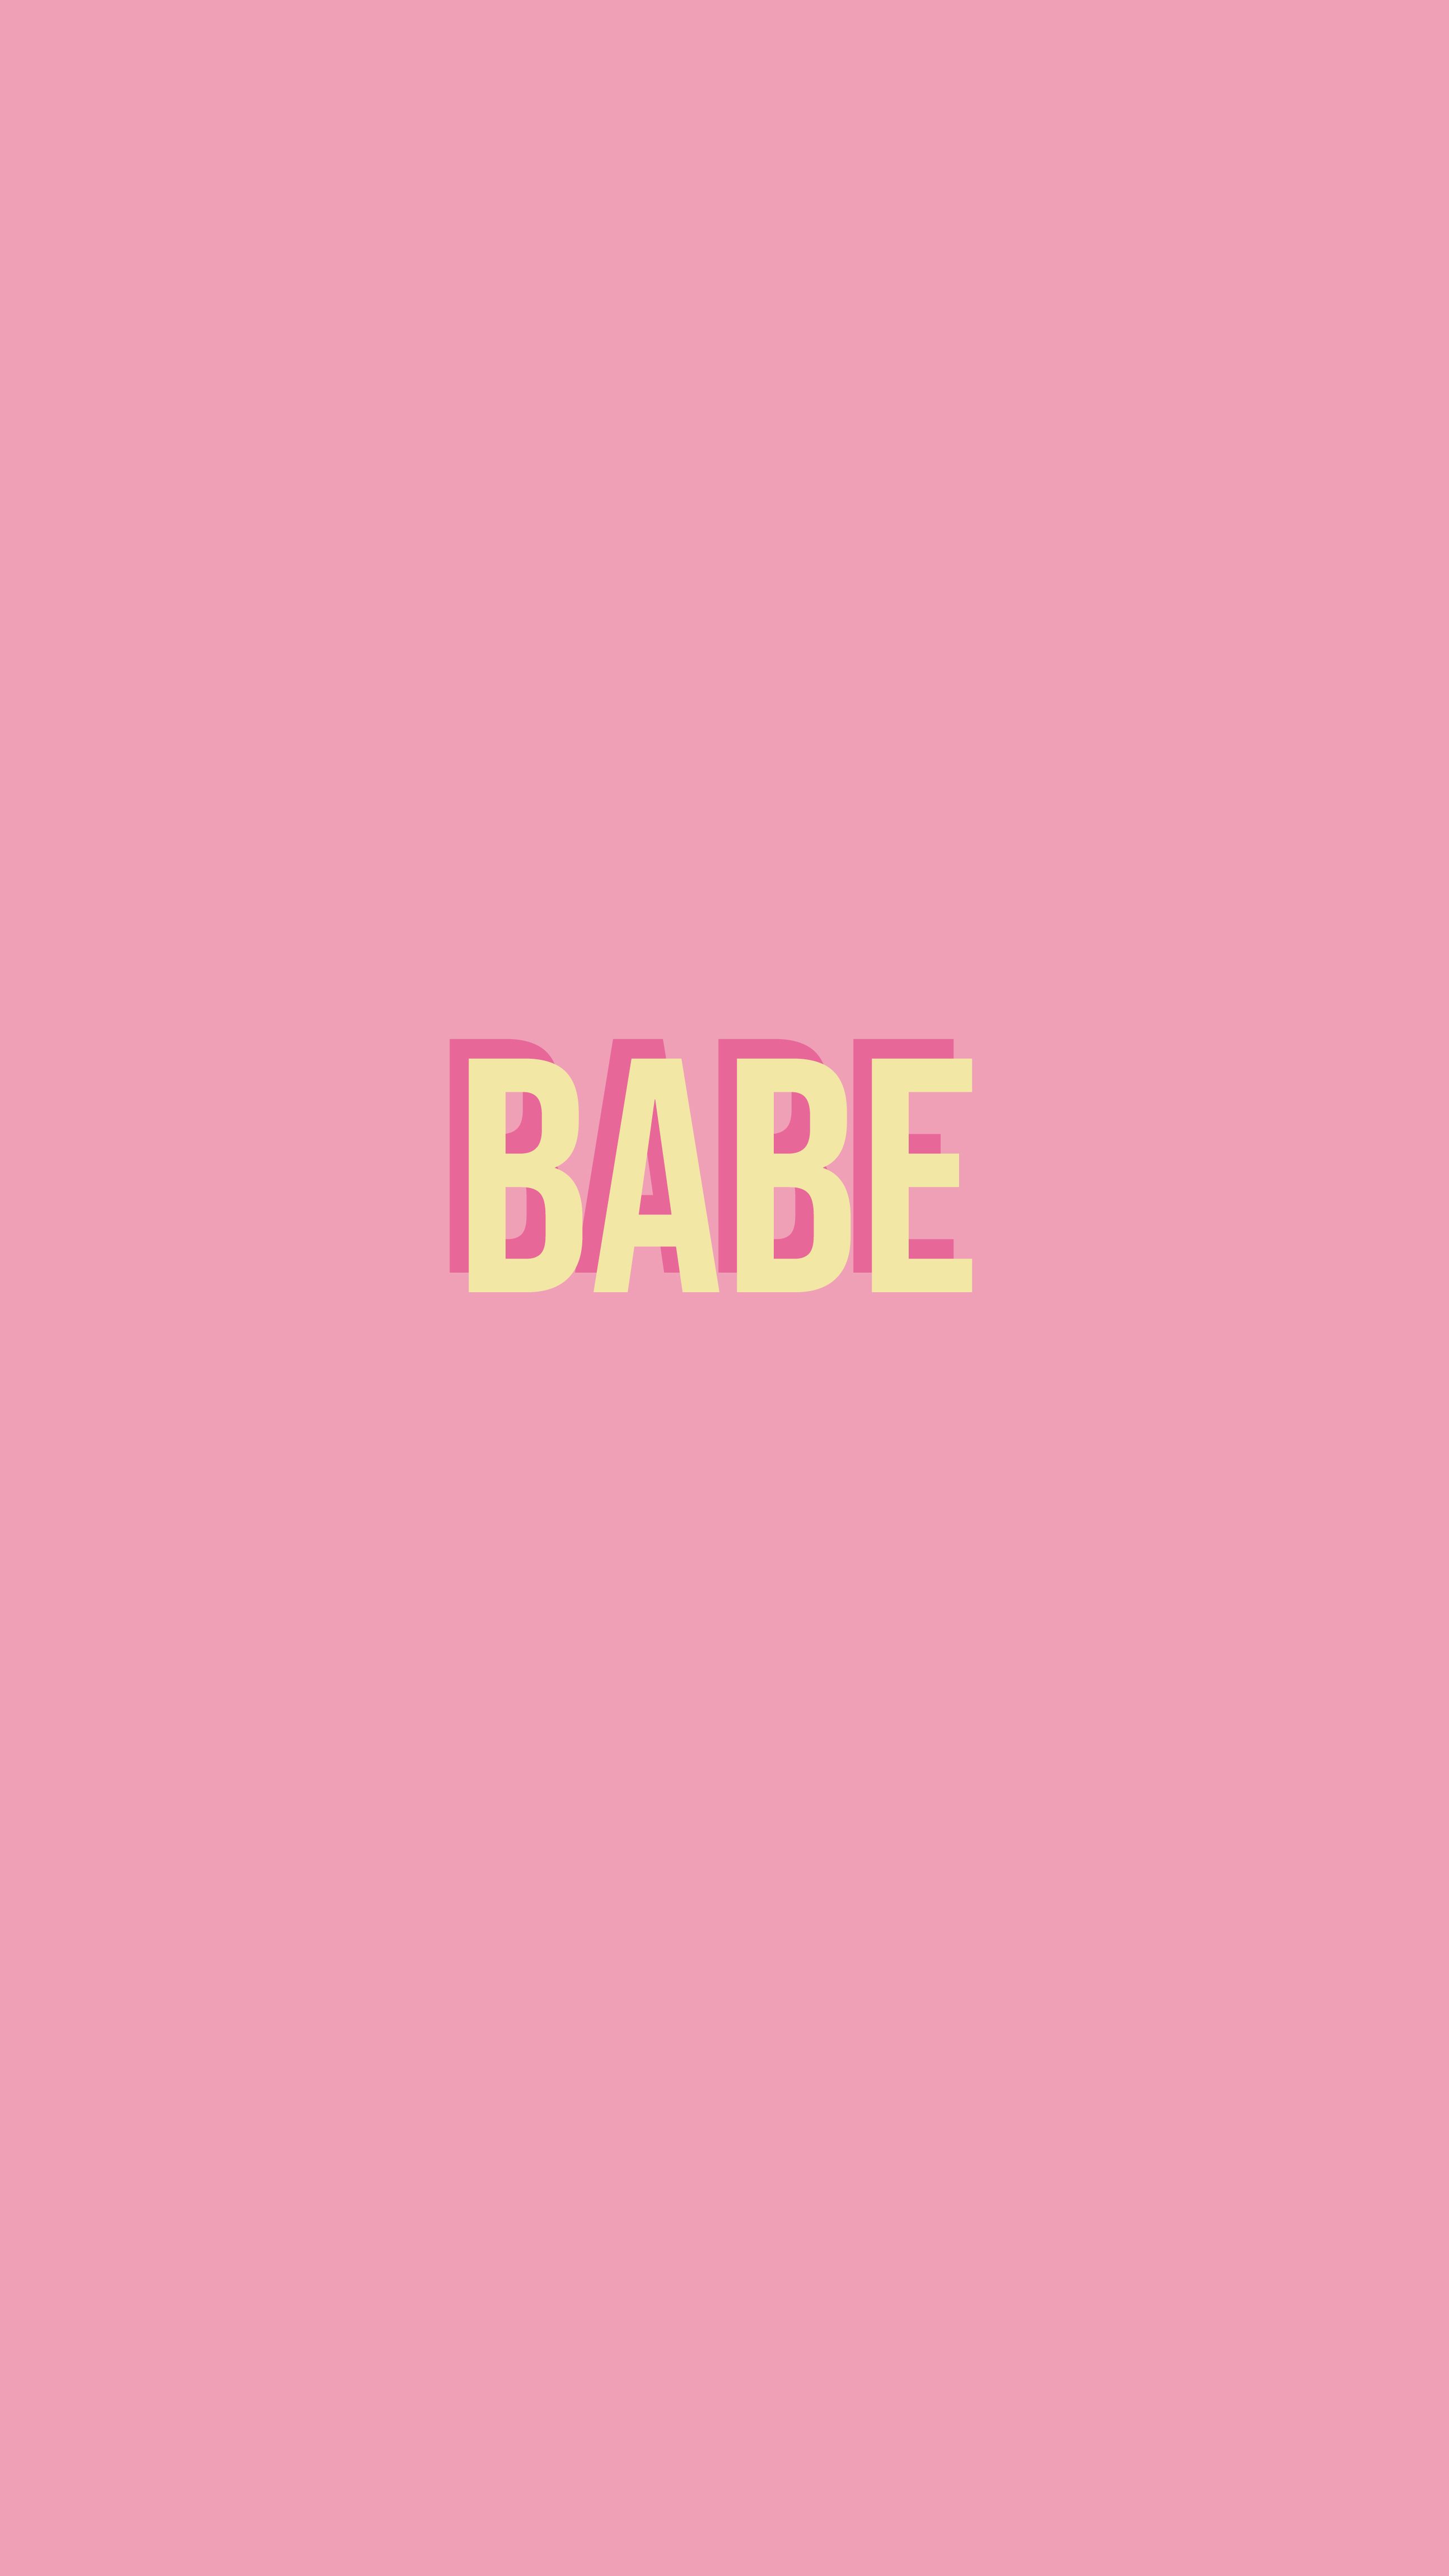 phone wallpaper // iPhone background #iphone #wallpaper #background #quote # words #text #iphone. Pink wallpaper iphone, Wallpaper iphone quotes, Quote background